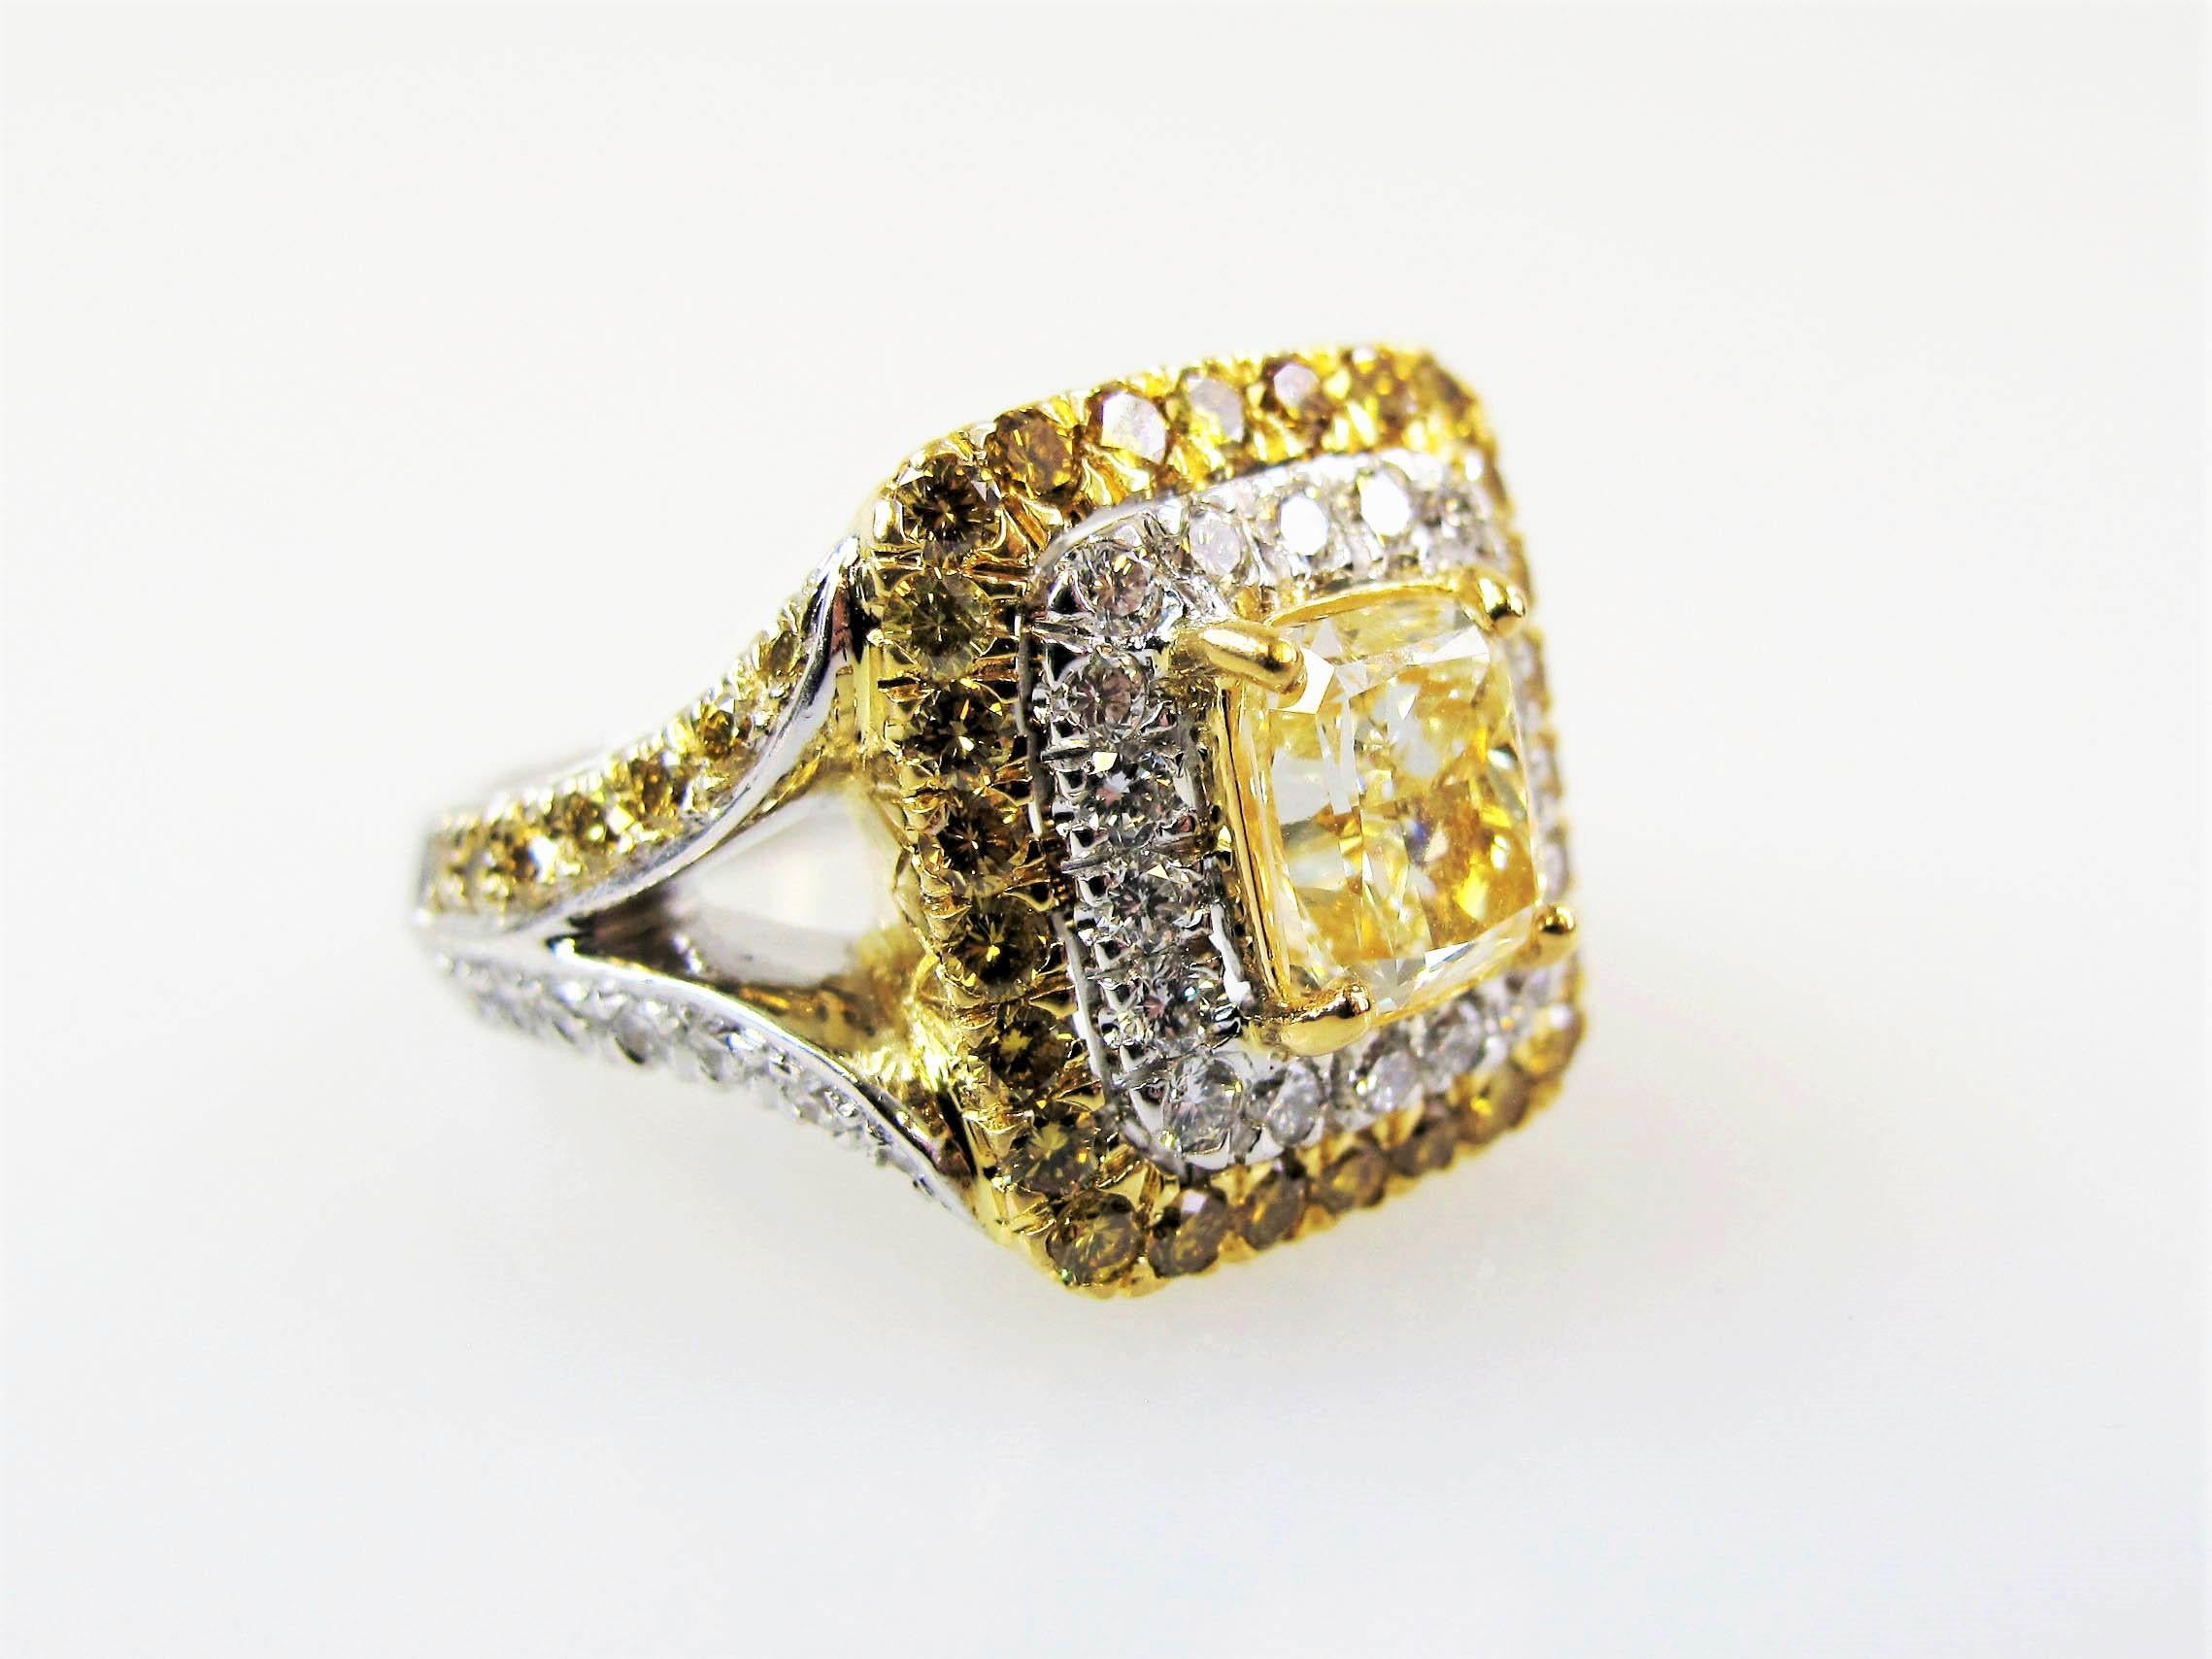 This absolutely gorgeous double halo split shank diamond ring combines white and yellow diamonds in a unique design to showcase the color and brilliance of both.  This ring could be a stunning cocktail ring or a unique engagement ring for a lover of